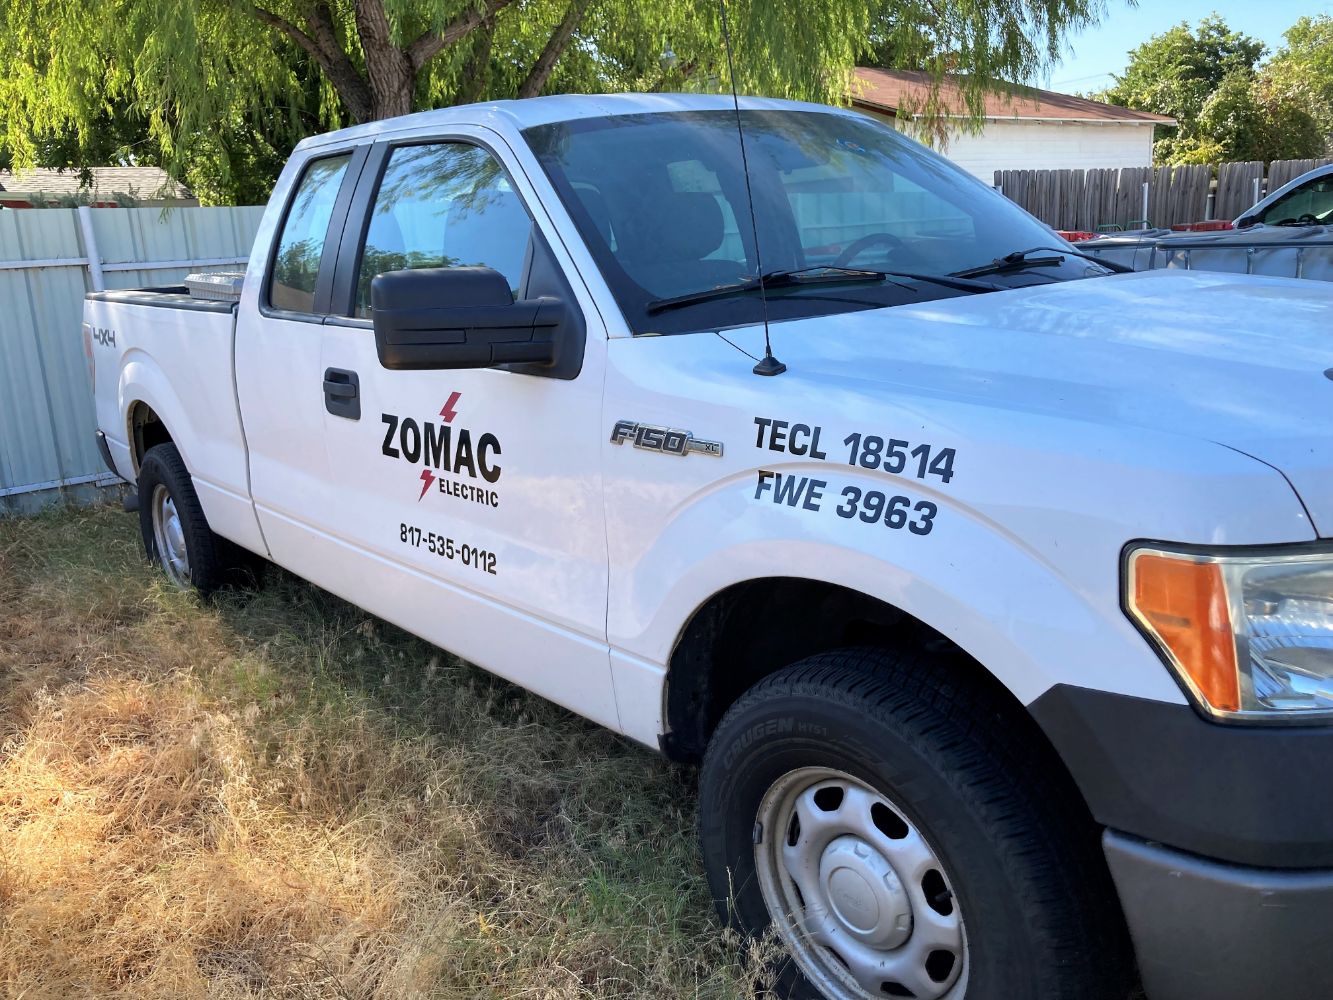 Zomac Electric - service vehicles, electrical supplies